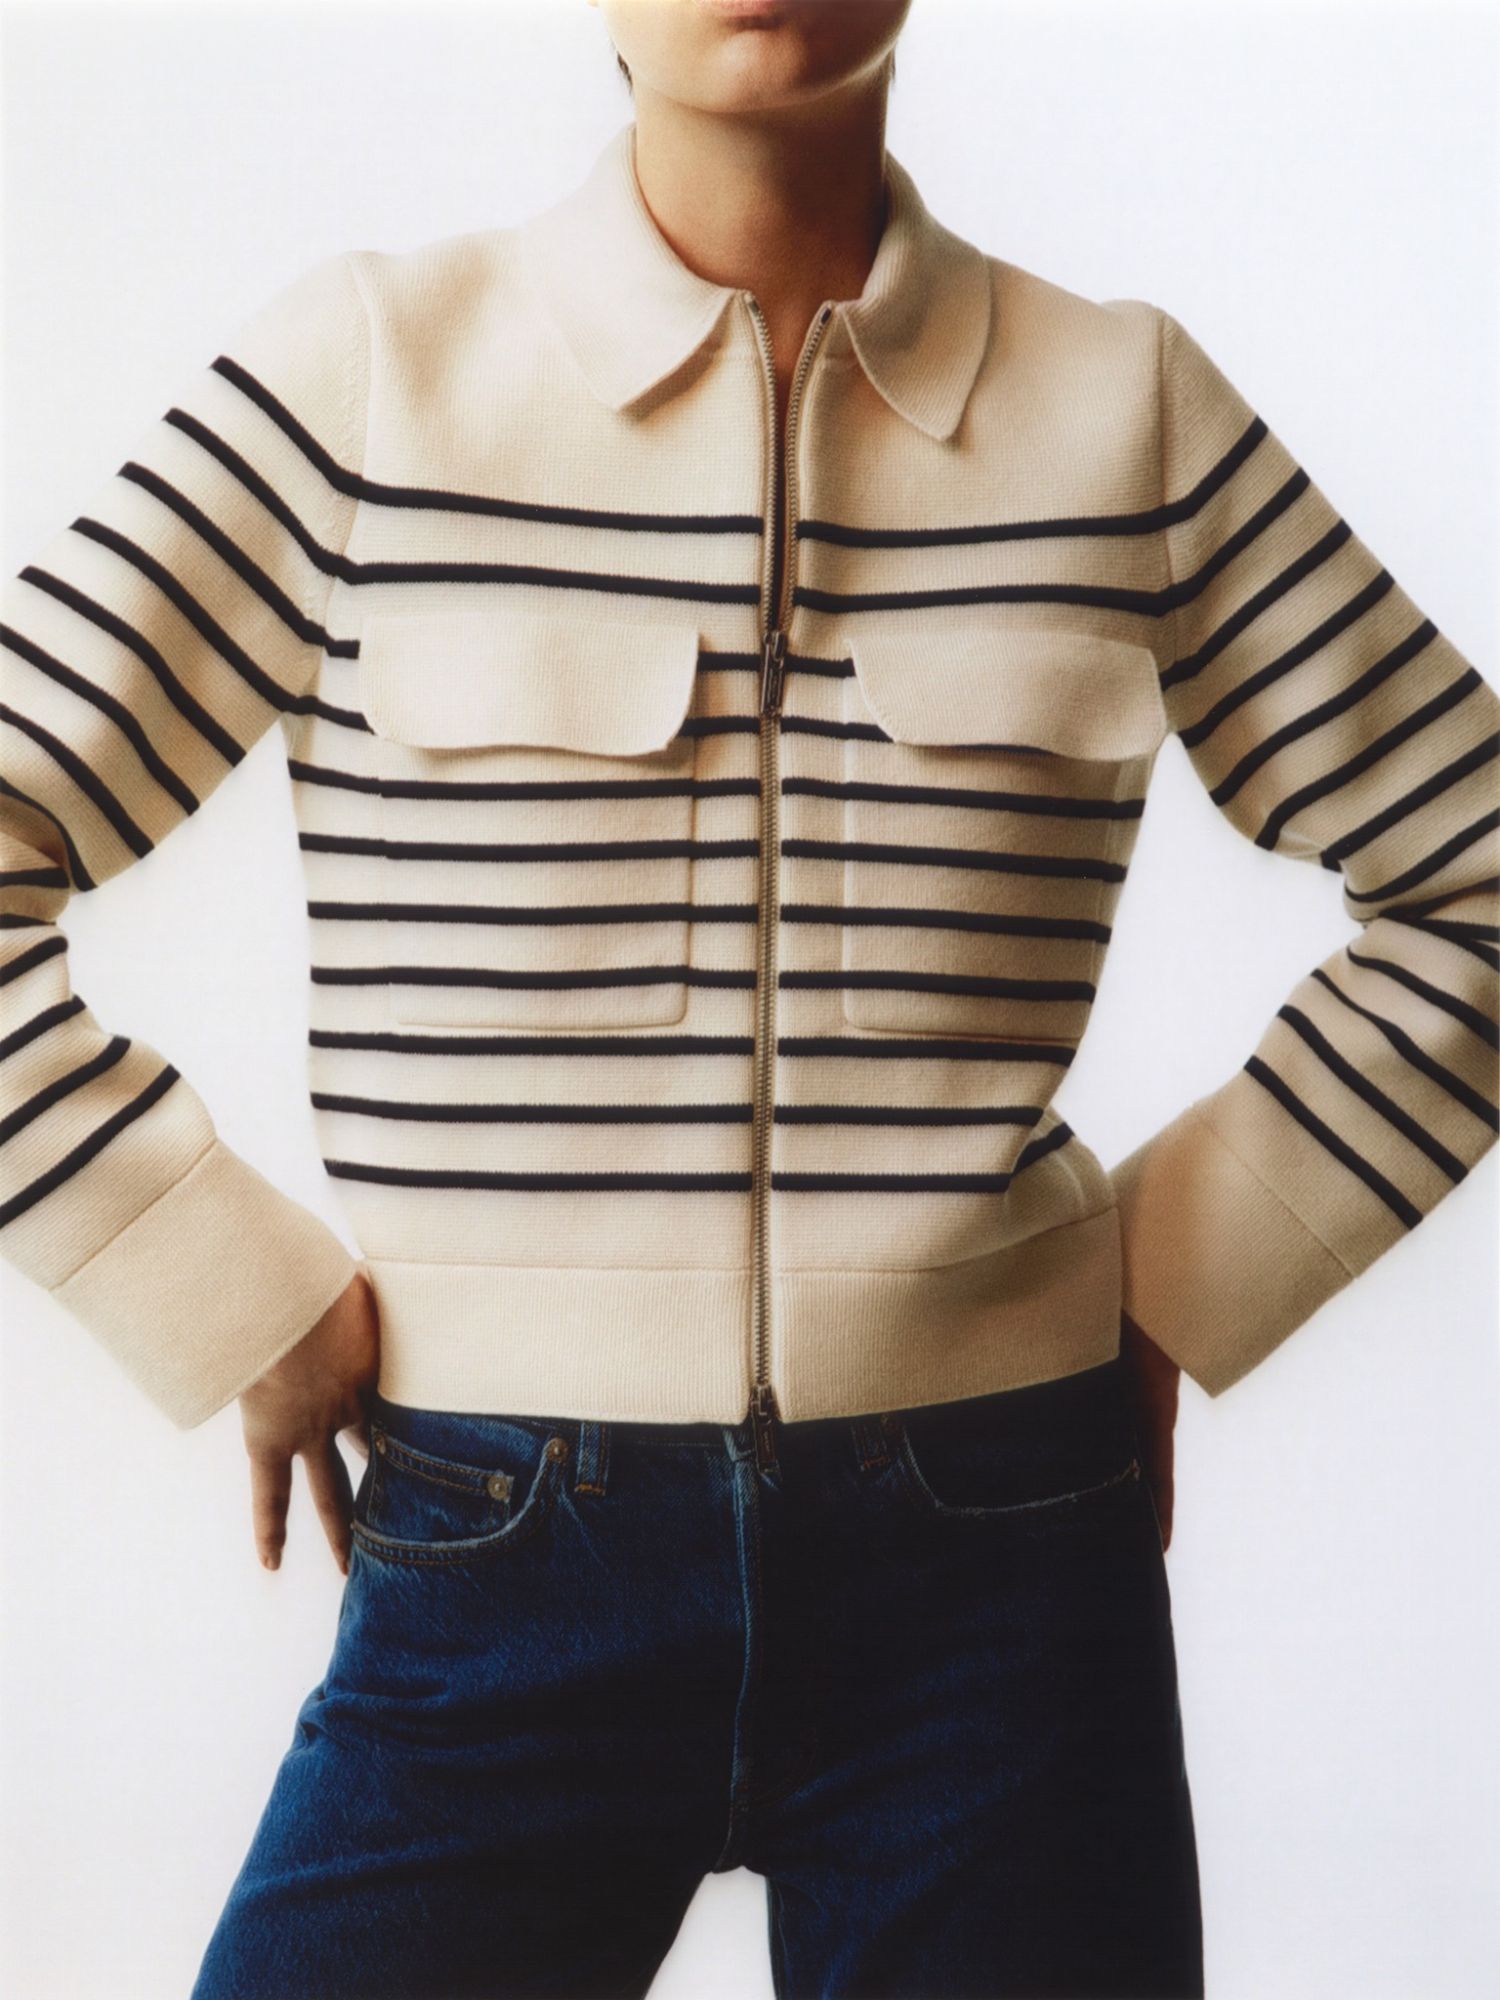 Striped Knitted Cotton Jacket Jeans Denim